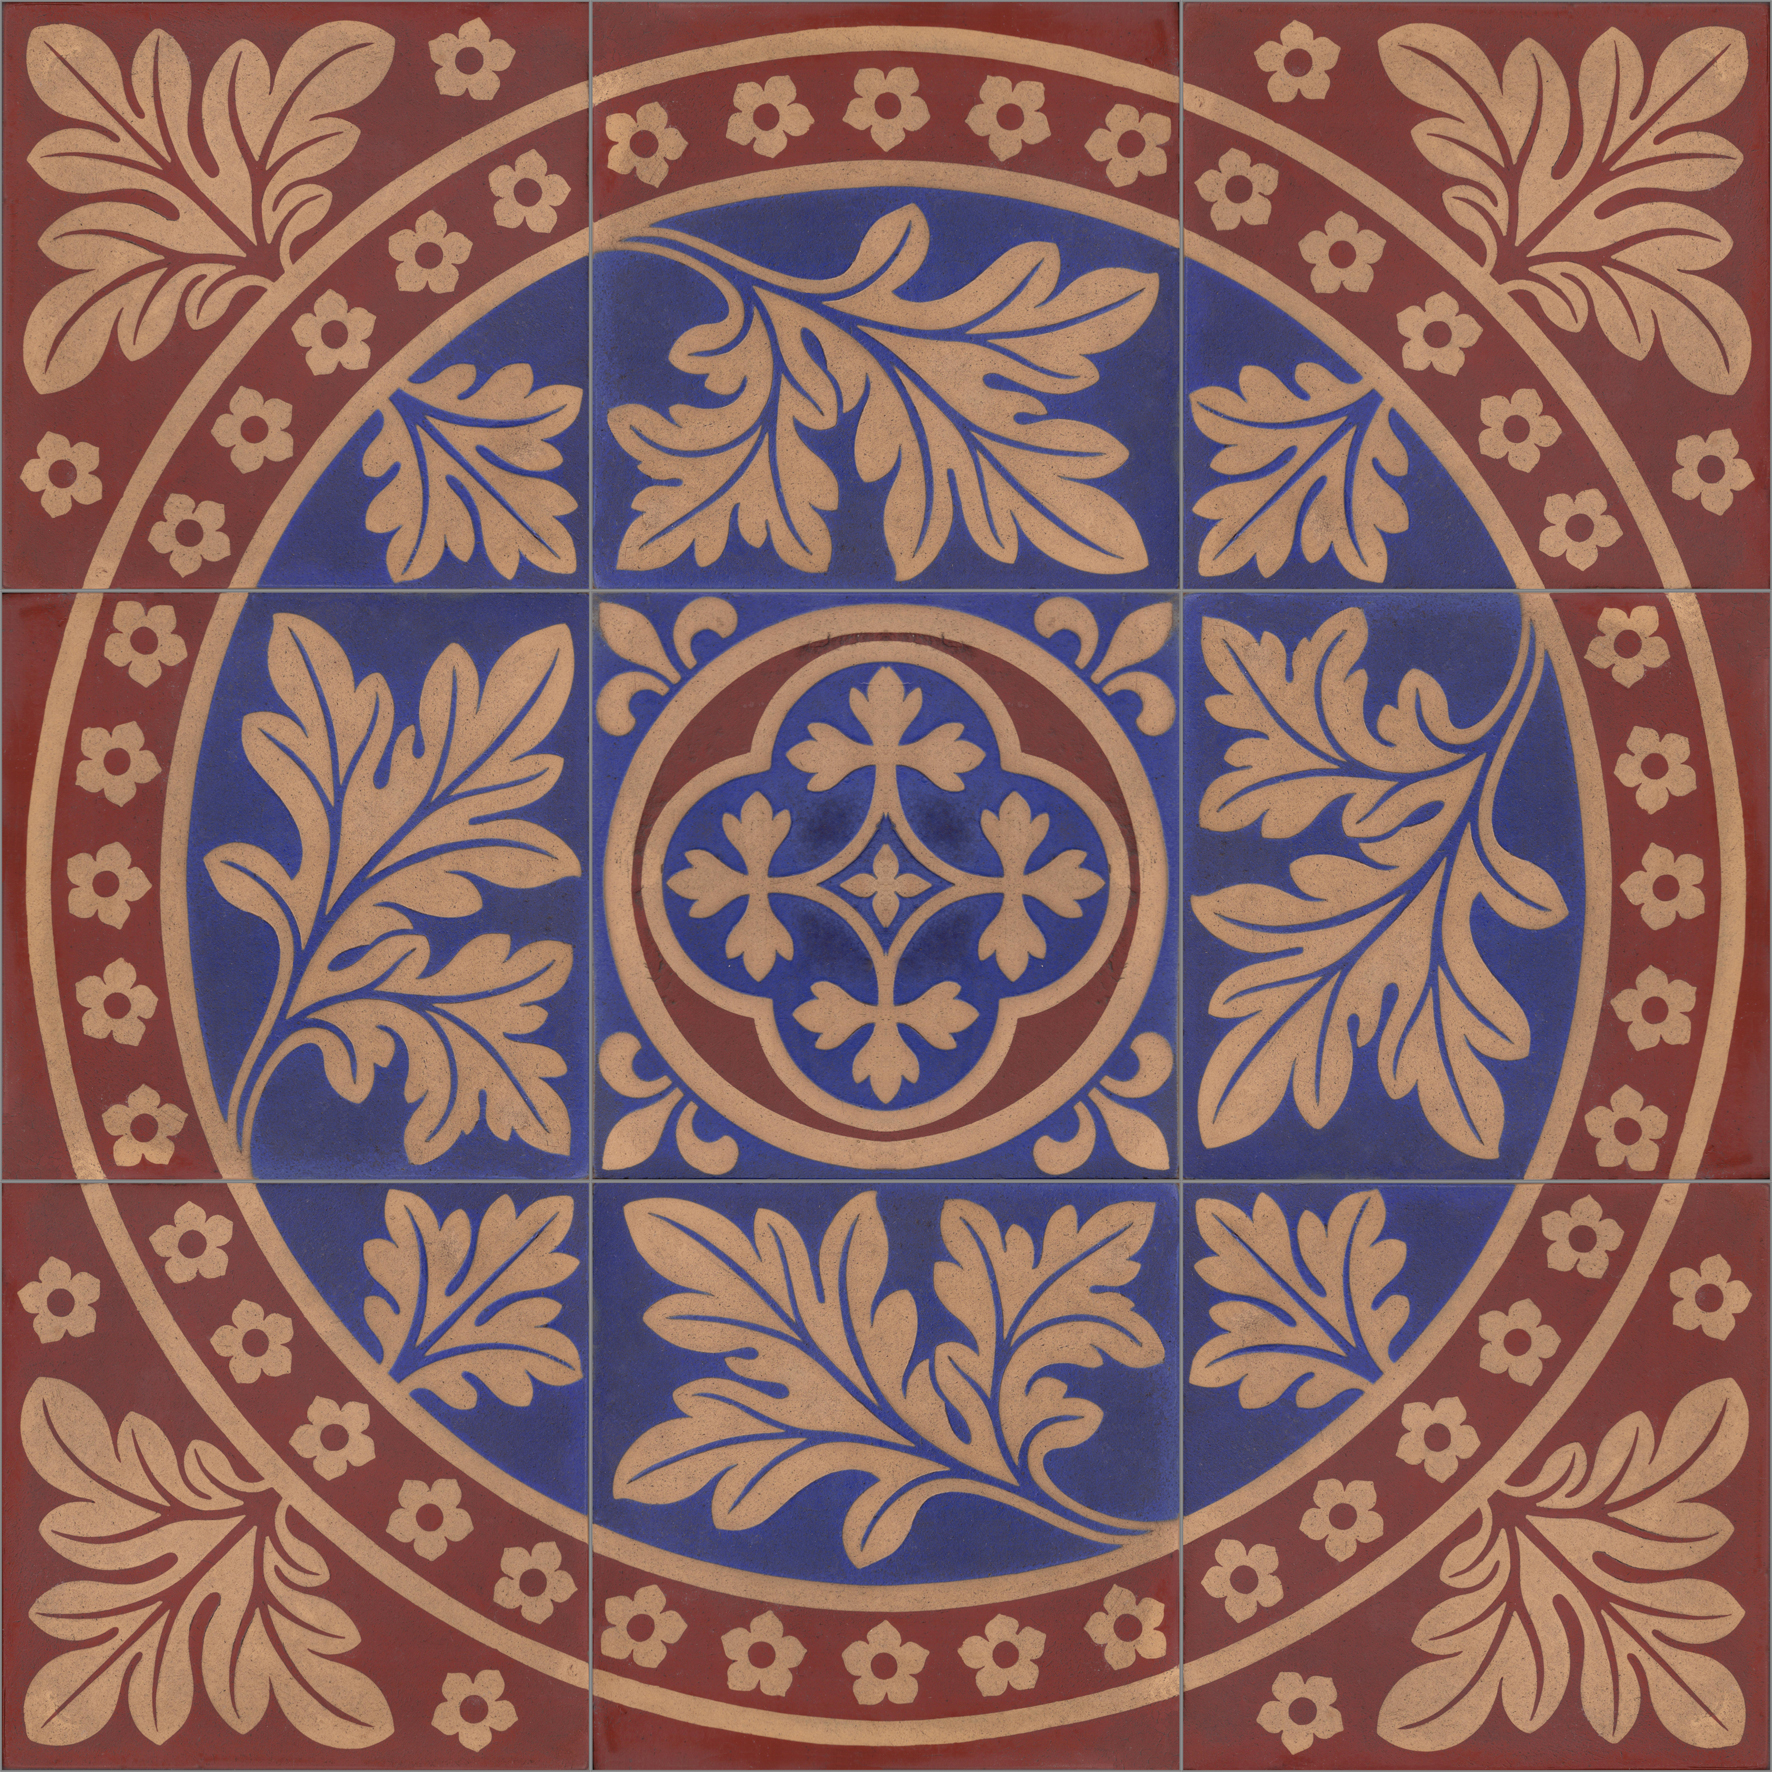 Pugin Fabric, Wallpaper and Home Decor | Spoonflower